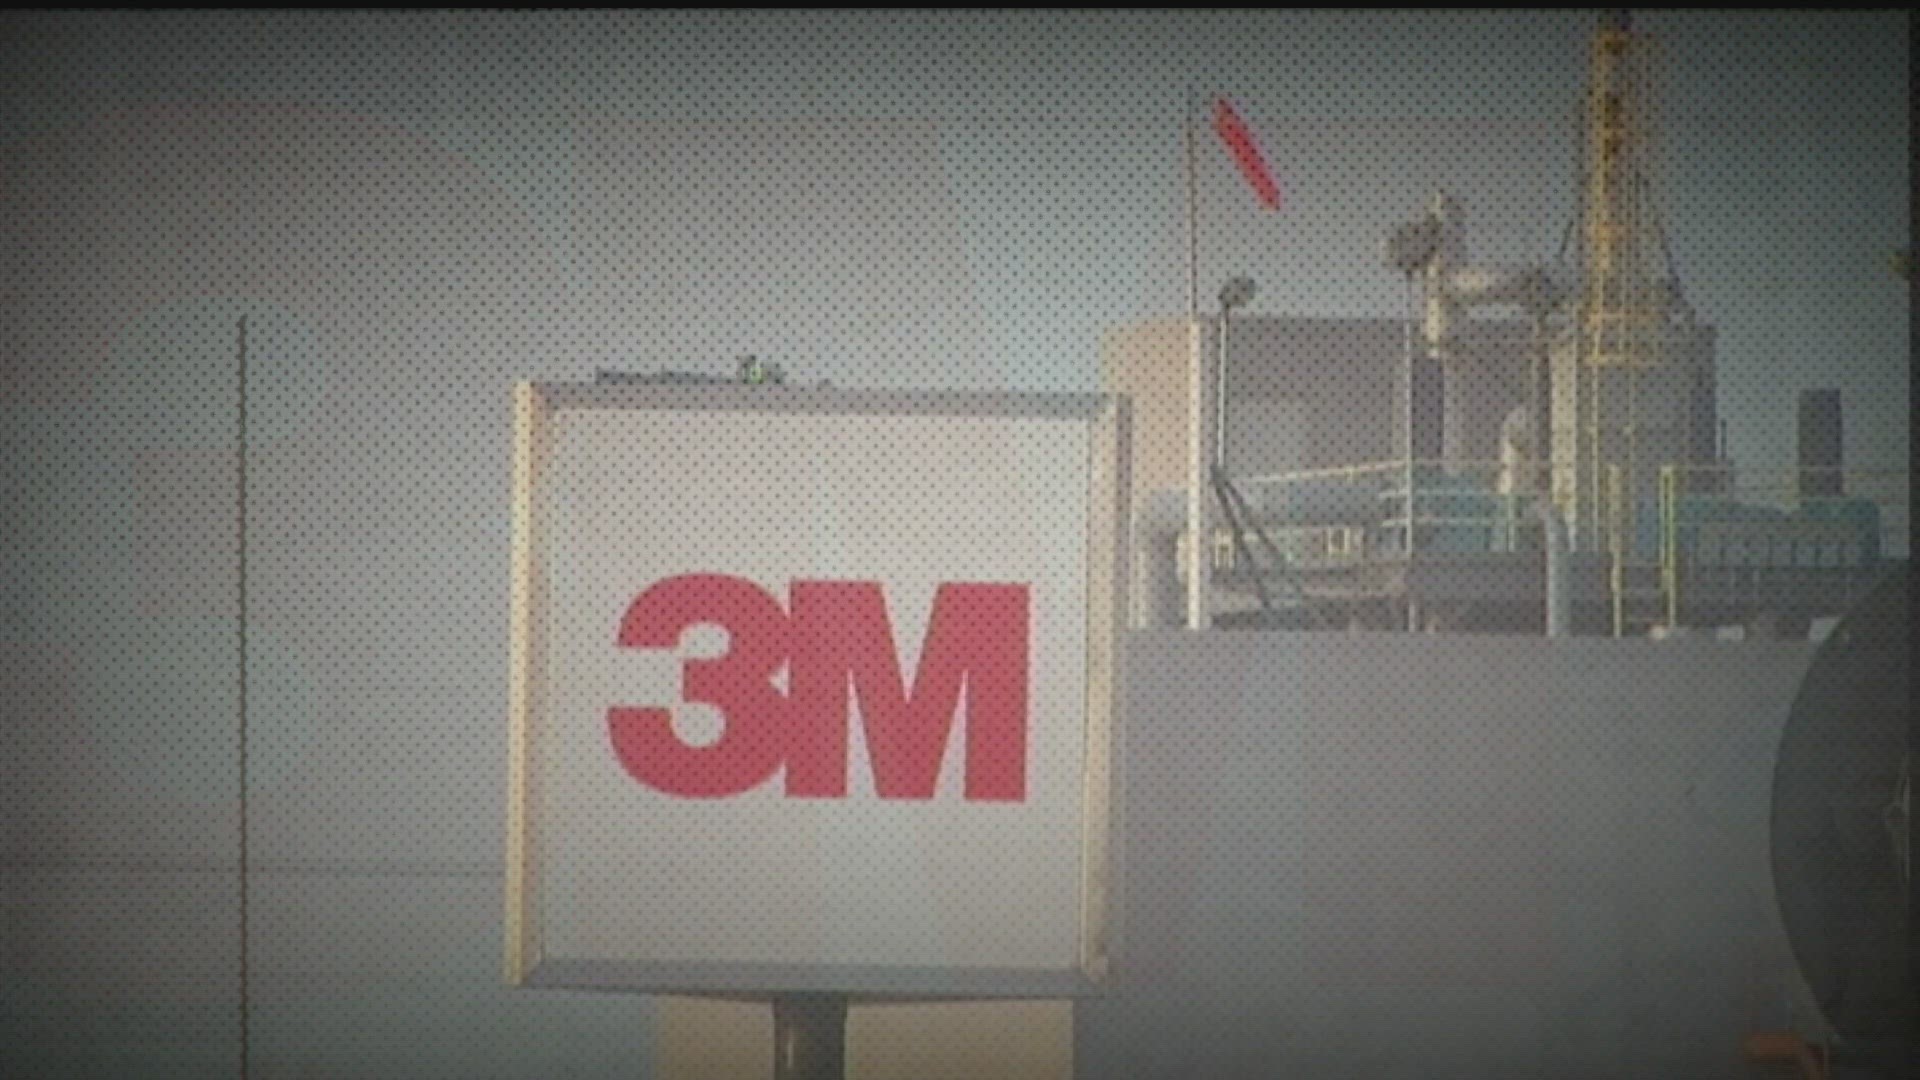 New Model Allows 3M Employees To Choose How And Where They Work - CBS  Minnesota